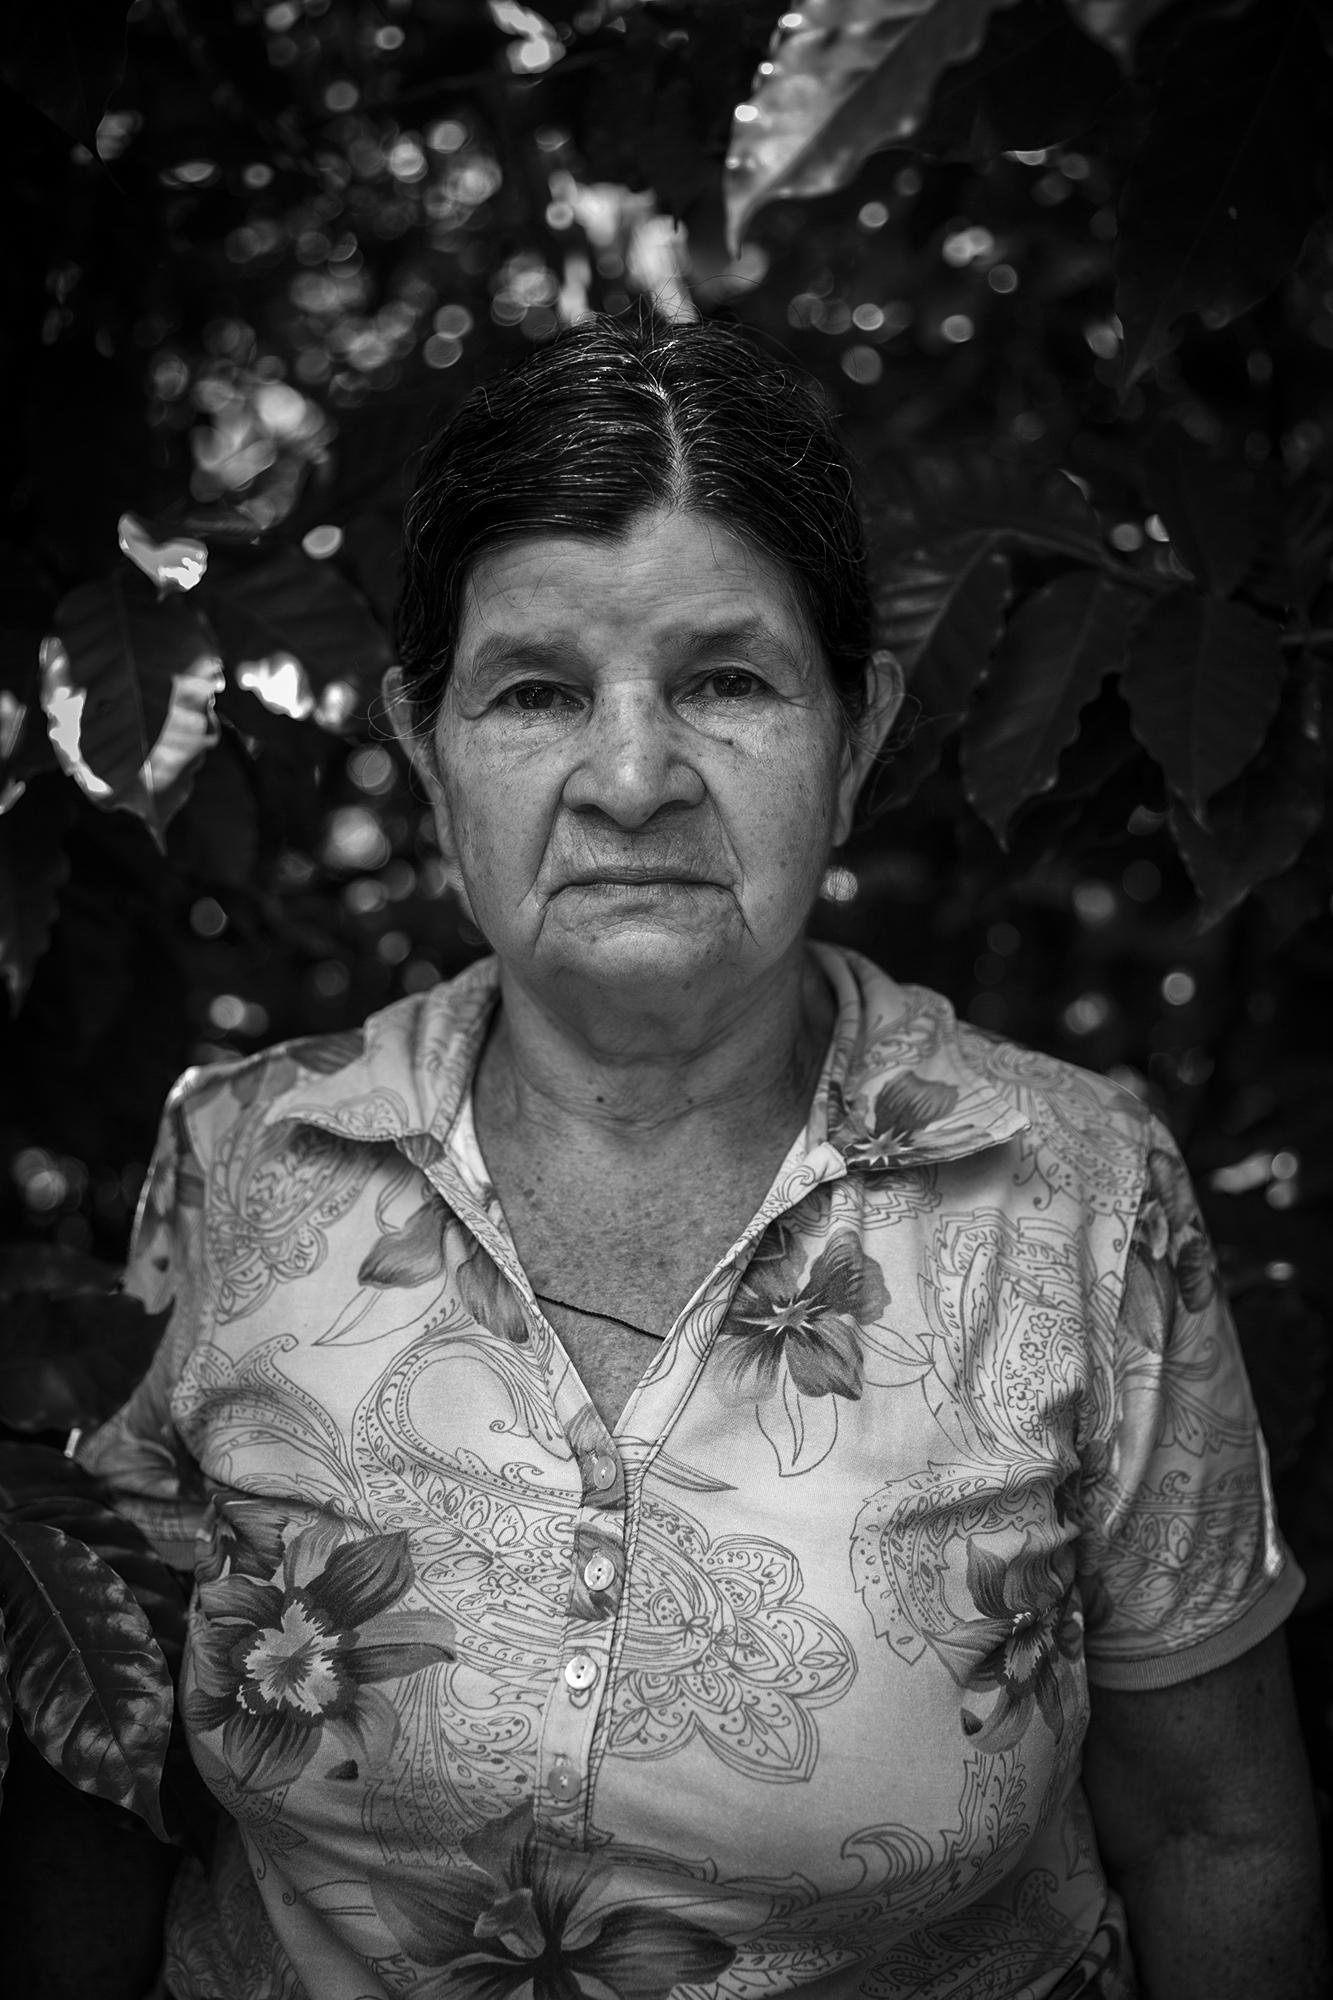 Julia Ayala was born on February 21, 1948. “It was huge, the crossing of the Lempa,” she says. She still remembers the noise of the planes and the “brutality of bullets.” Julia’s eyes fill with tears as she remembers: “In Los Hernández, in Honduras, when the people arrived they were naked and covered in blood.” 